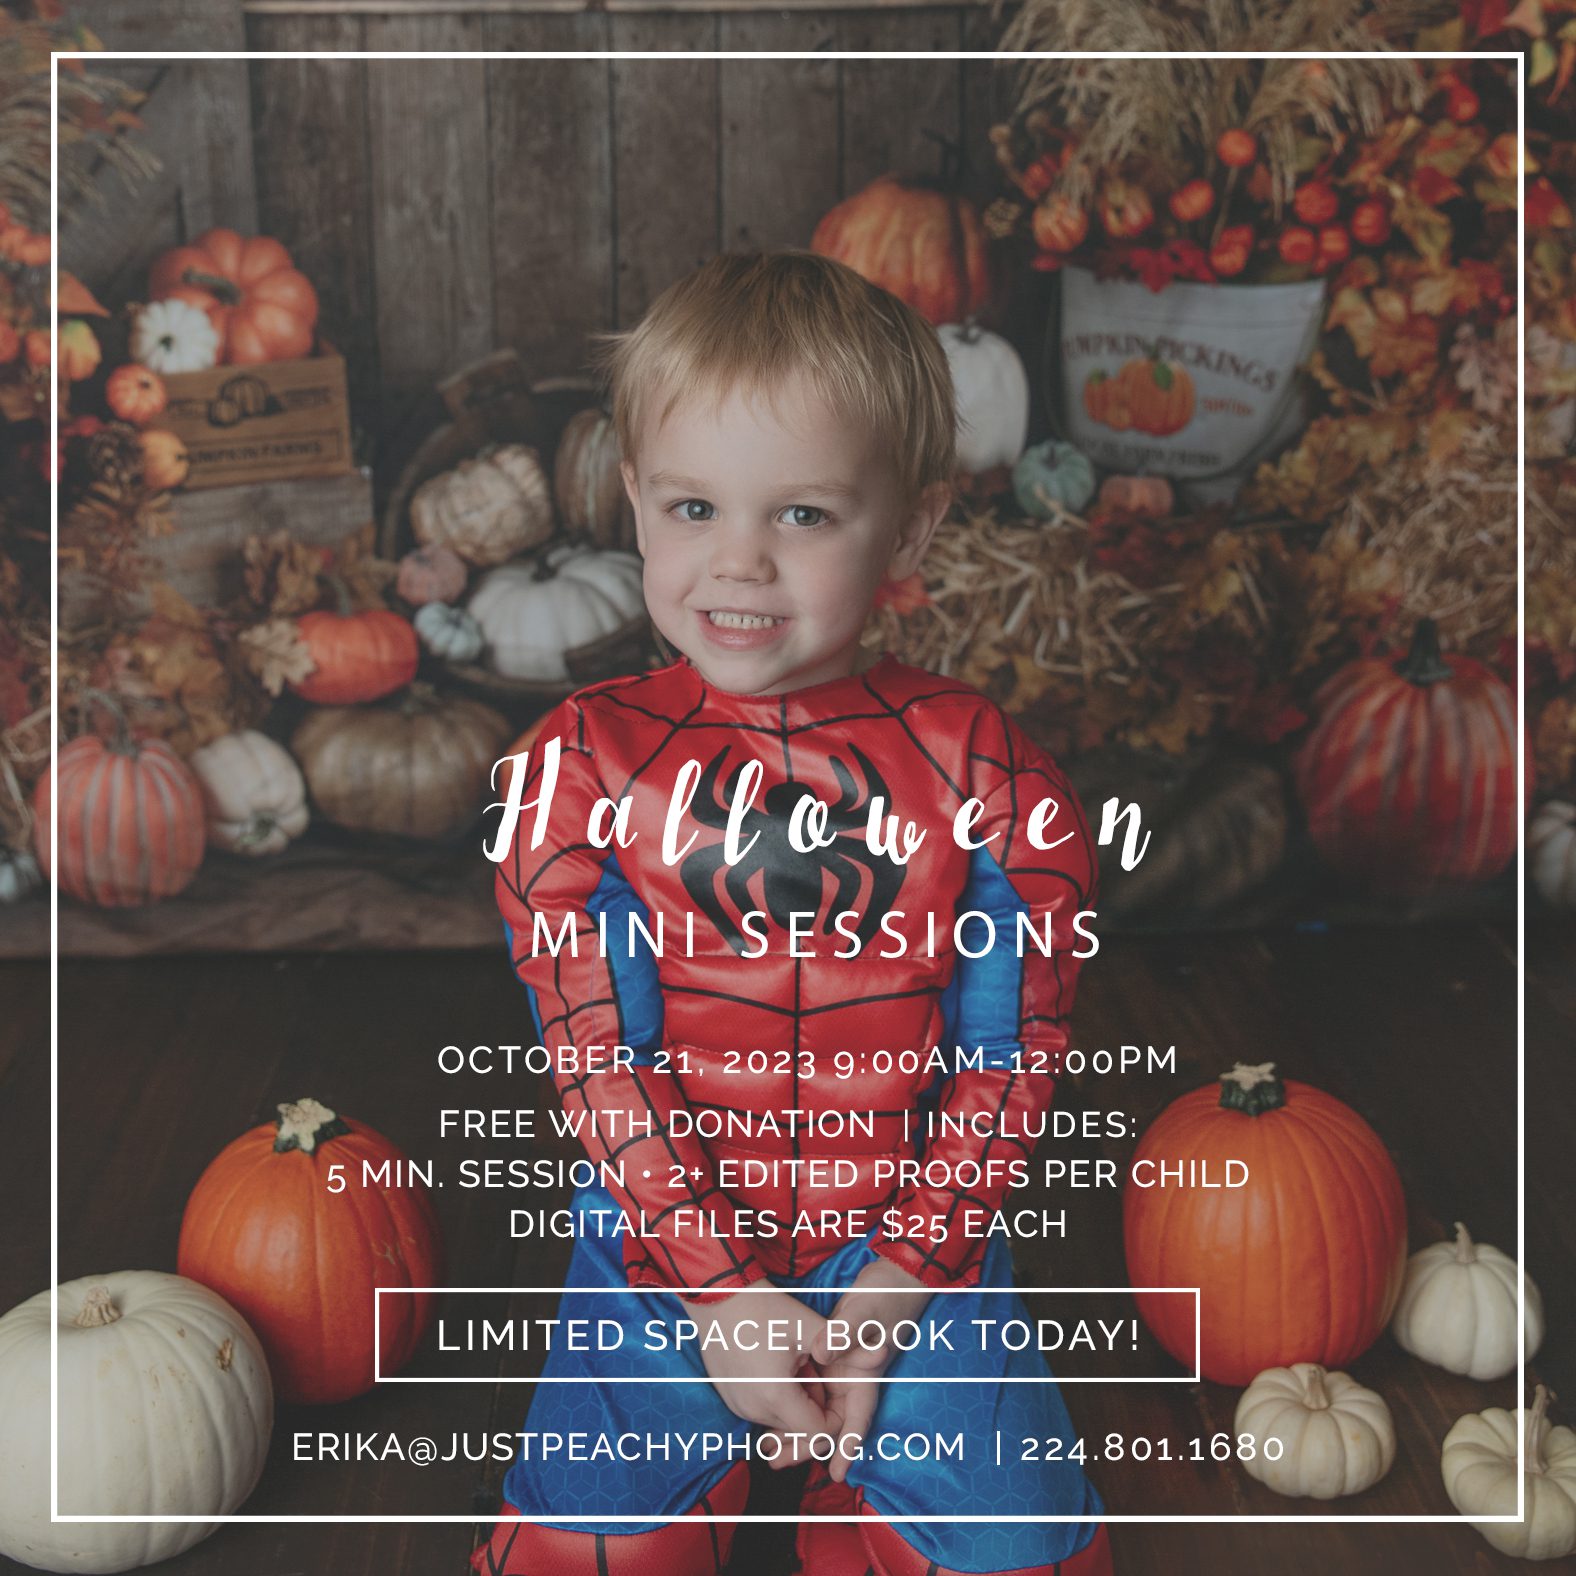 halloween mini sessions event in Palatine October 21st, 2023. boy in spiderman costume